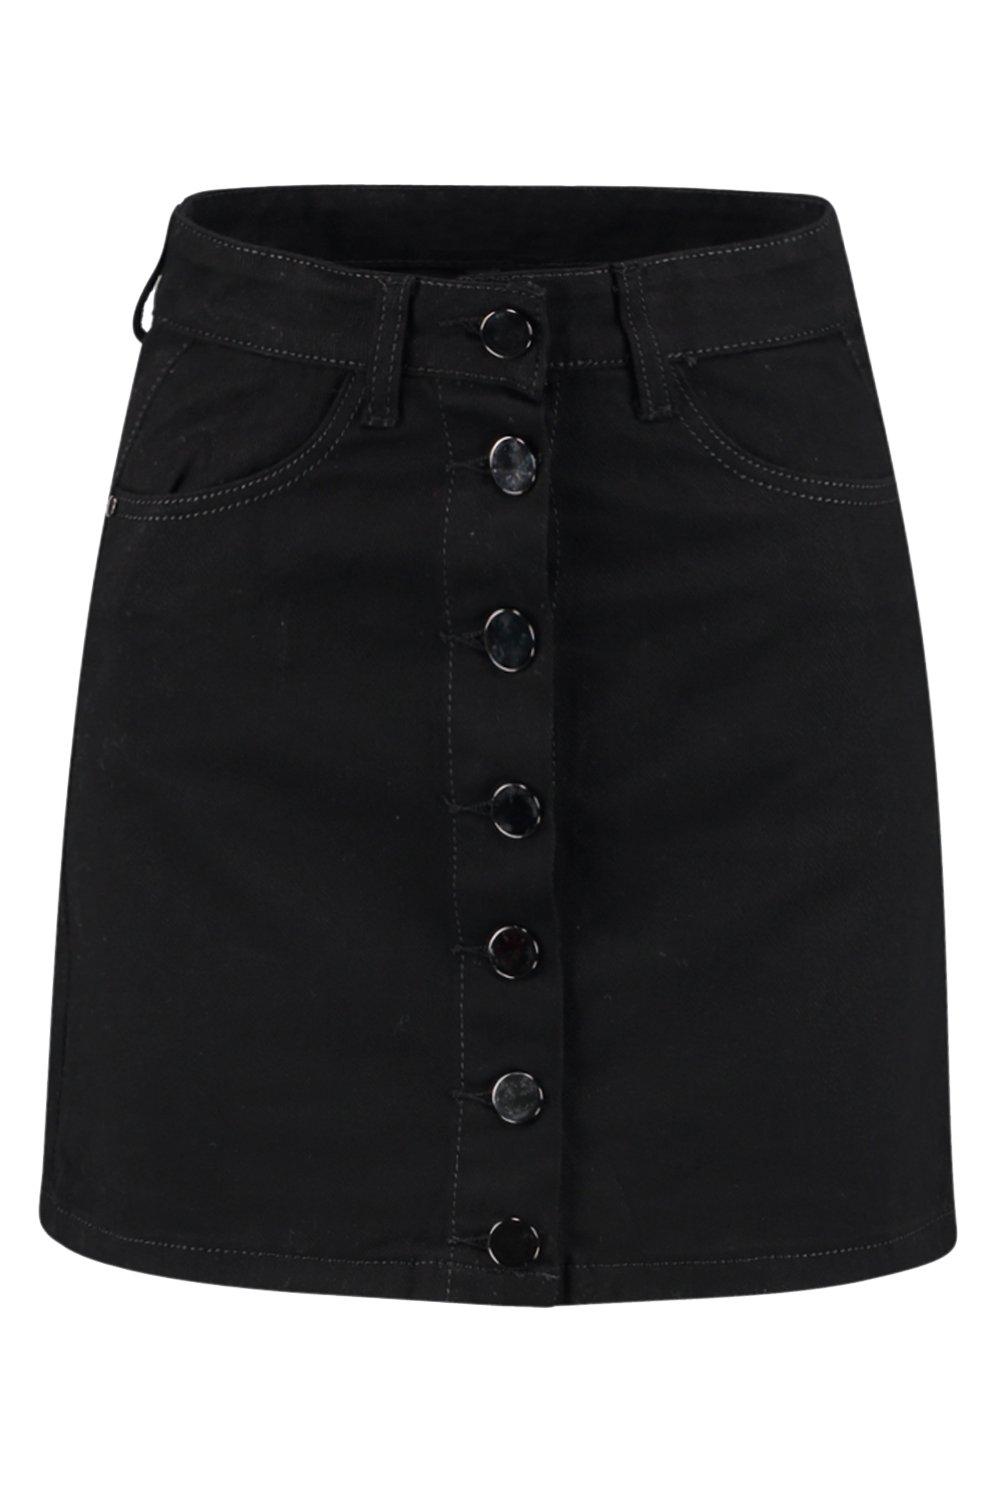 black jean skirt with buttons